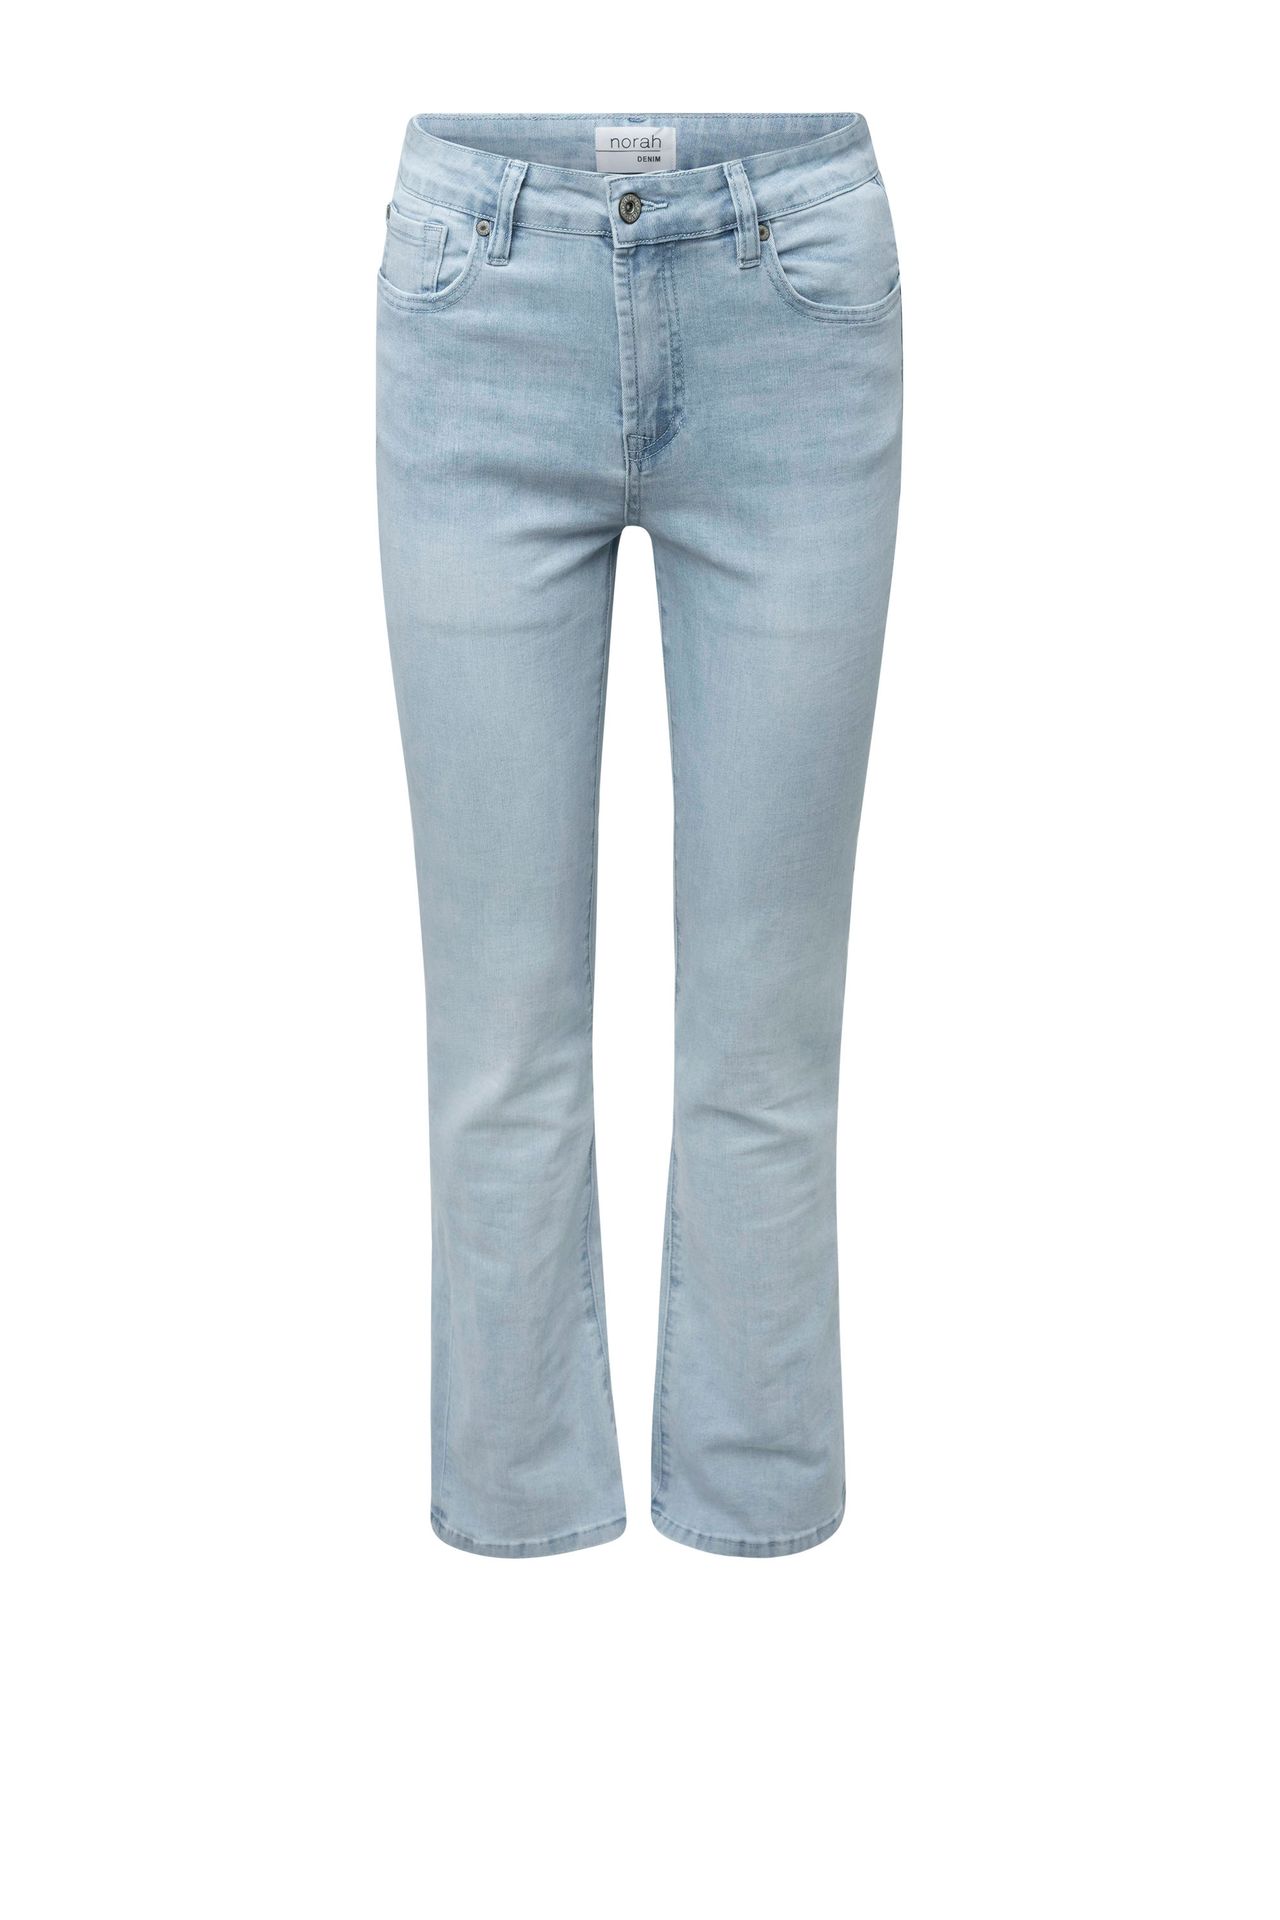 Norah Flared jeans blue 214039-400